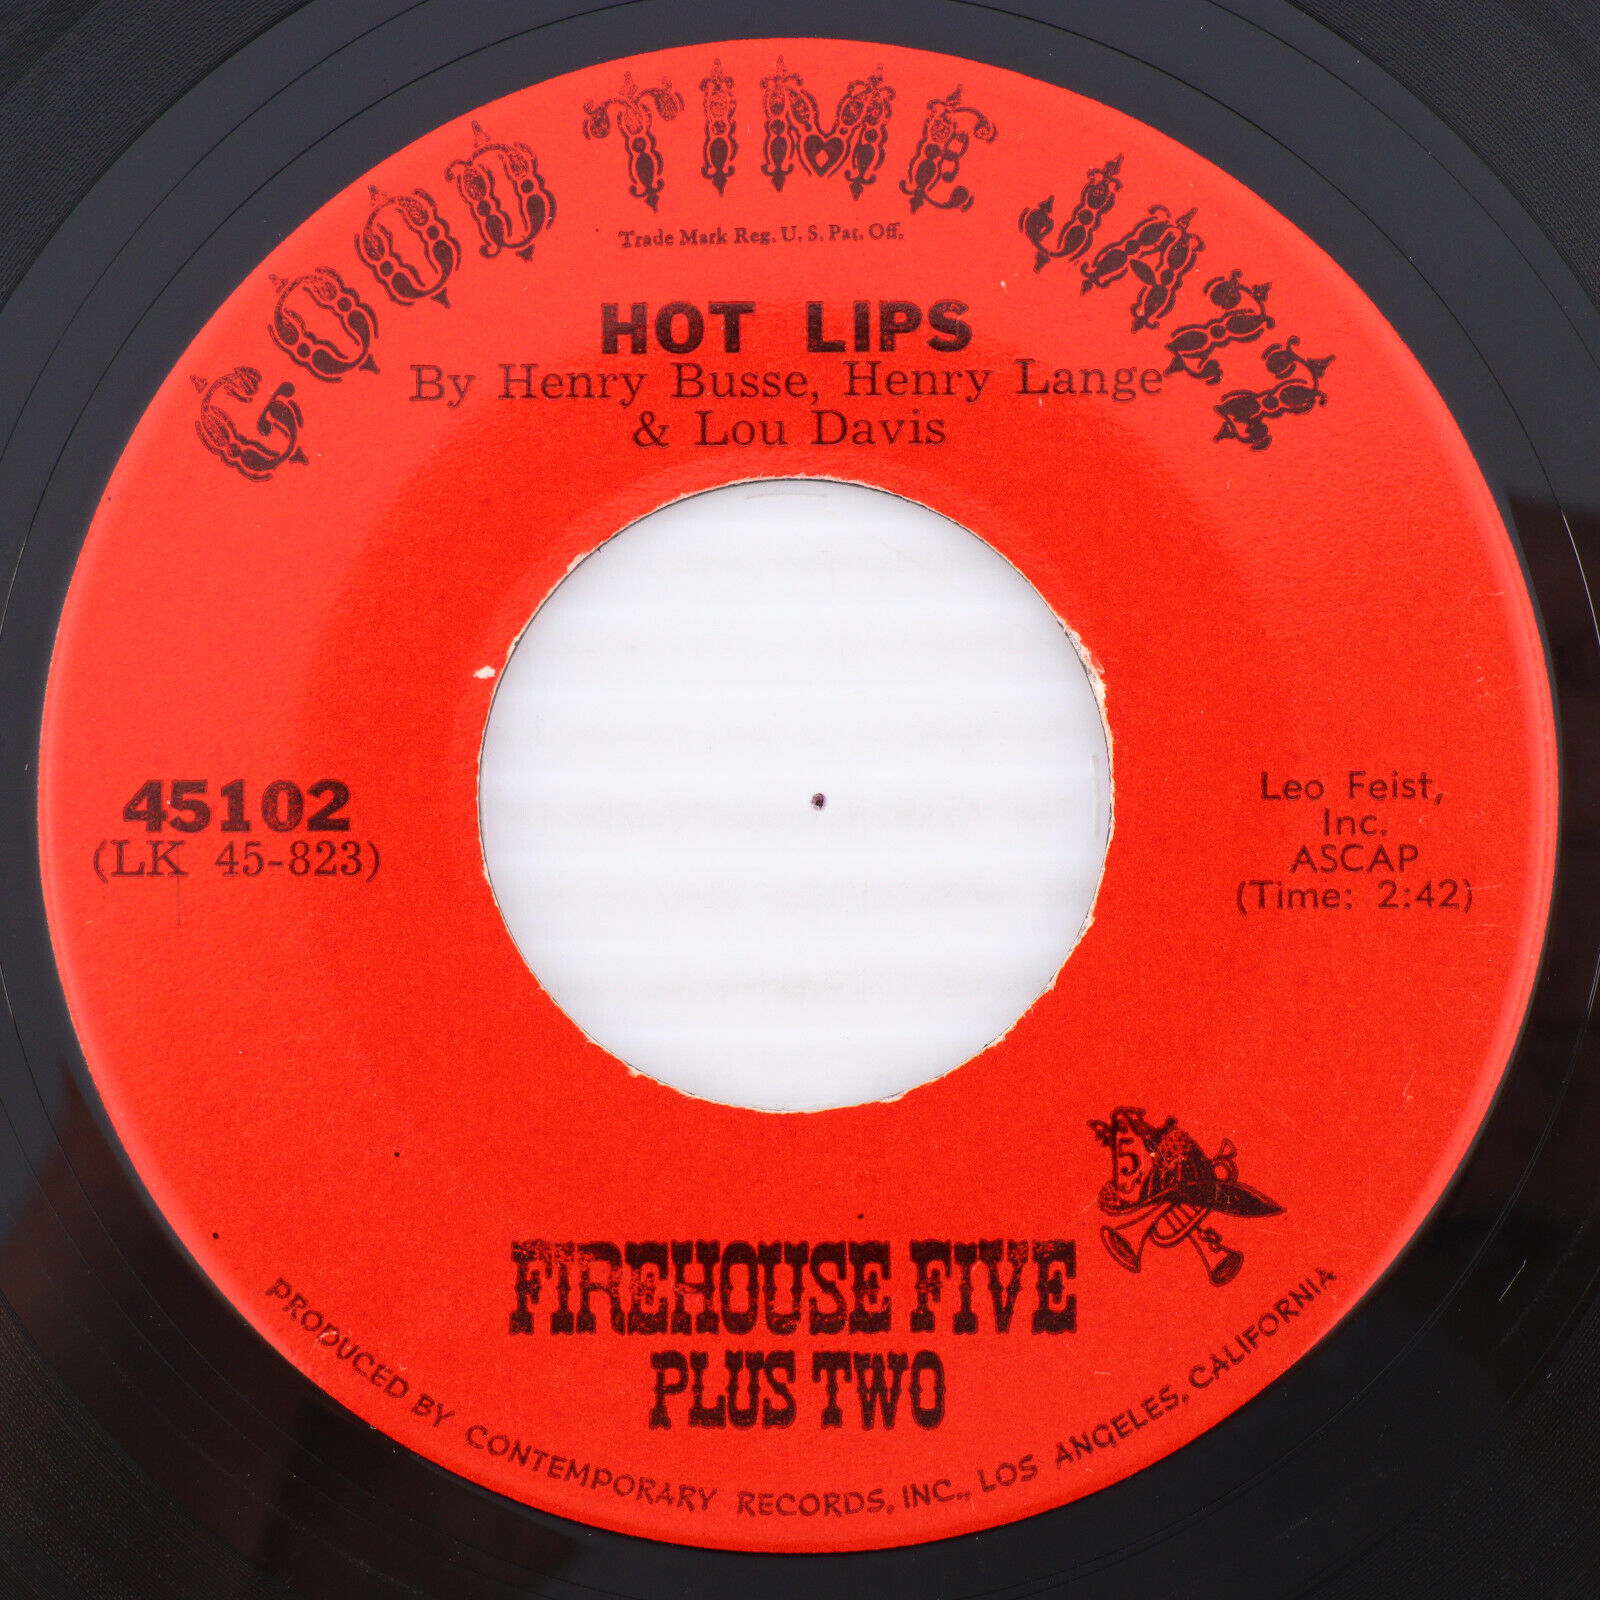 Firehouse Five Plus Two – Hot Lips / Flamin' Mamie - 7" Vinyl 45rpm Record 45102